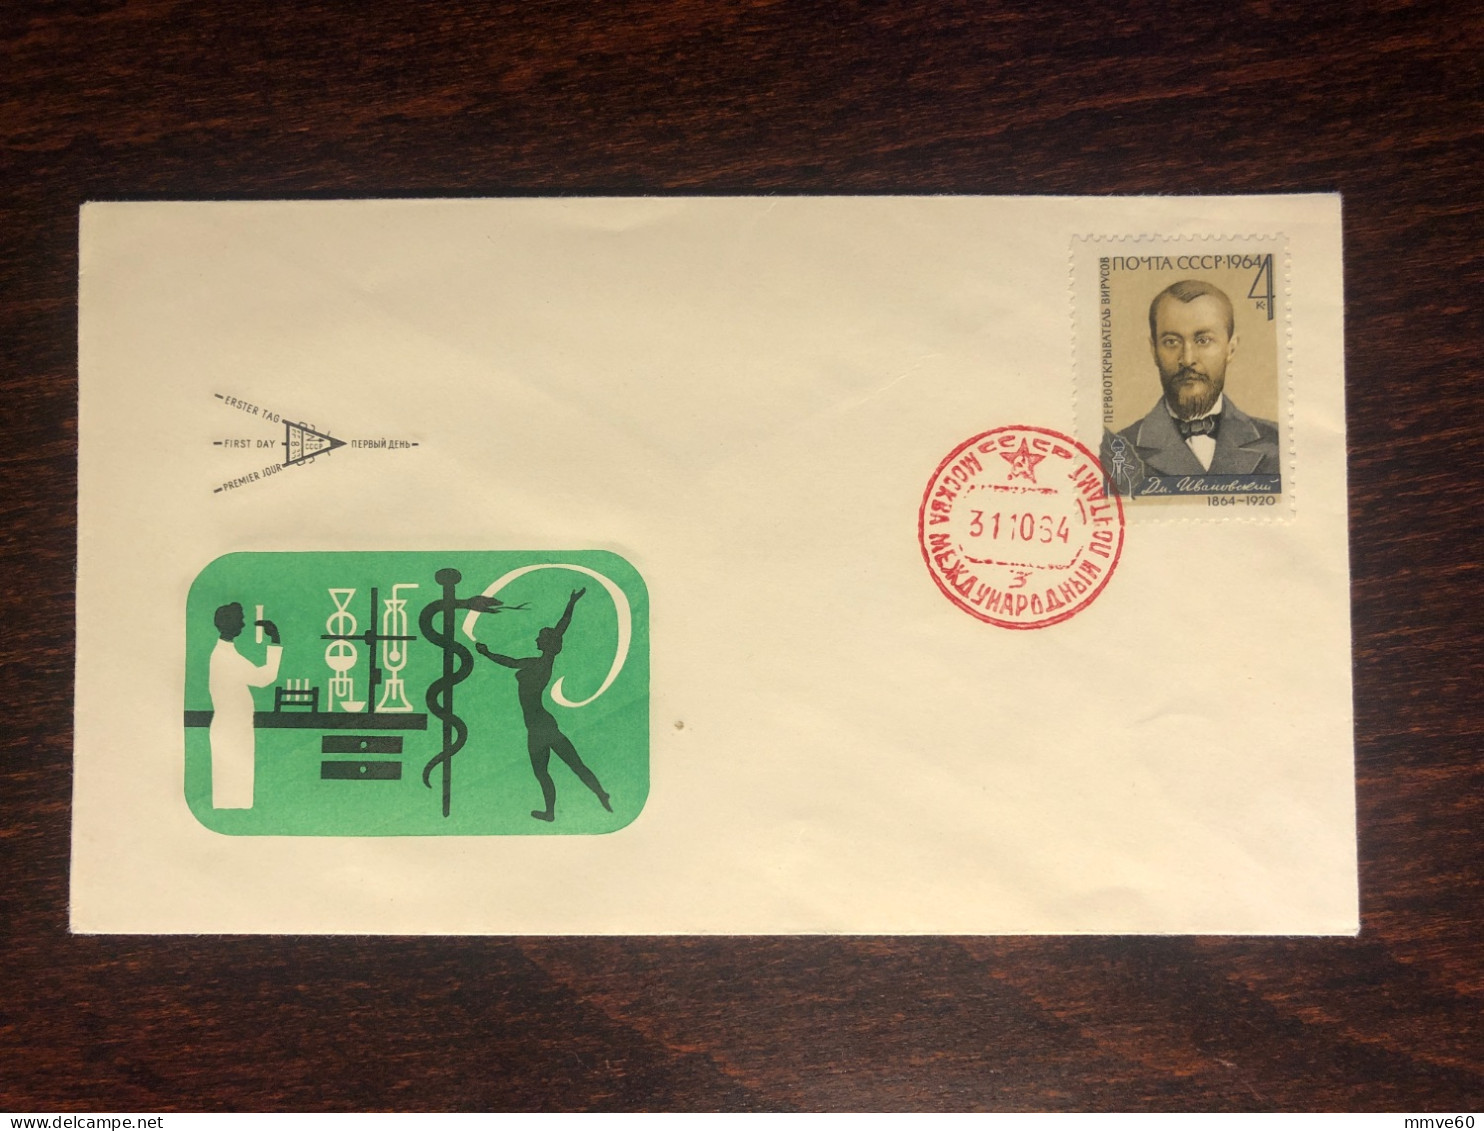 RUSSIA USSR FDC COVER 1964 YEAR IVANOVSKY VIROLOGY BACTERIOLOGY HEALTH MEDICINE STAMPS - Briefe U. Dokumente